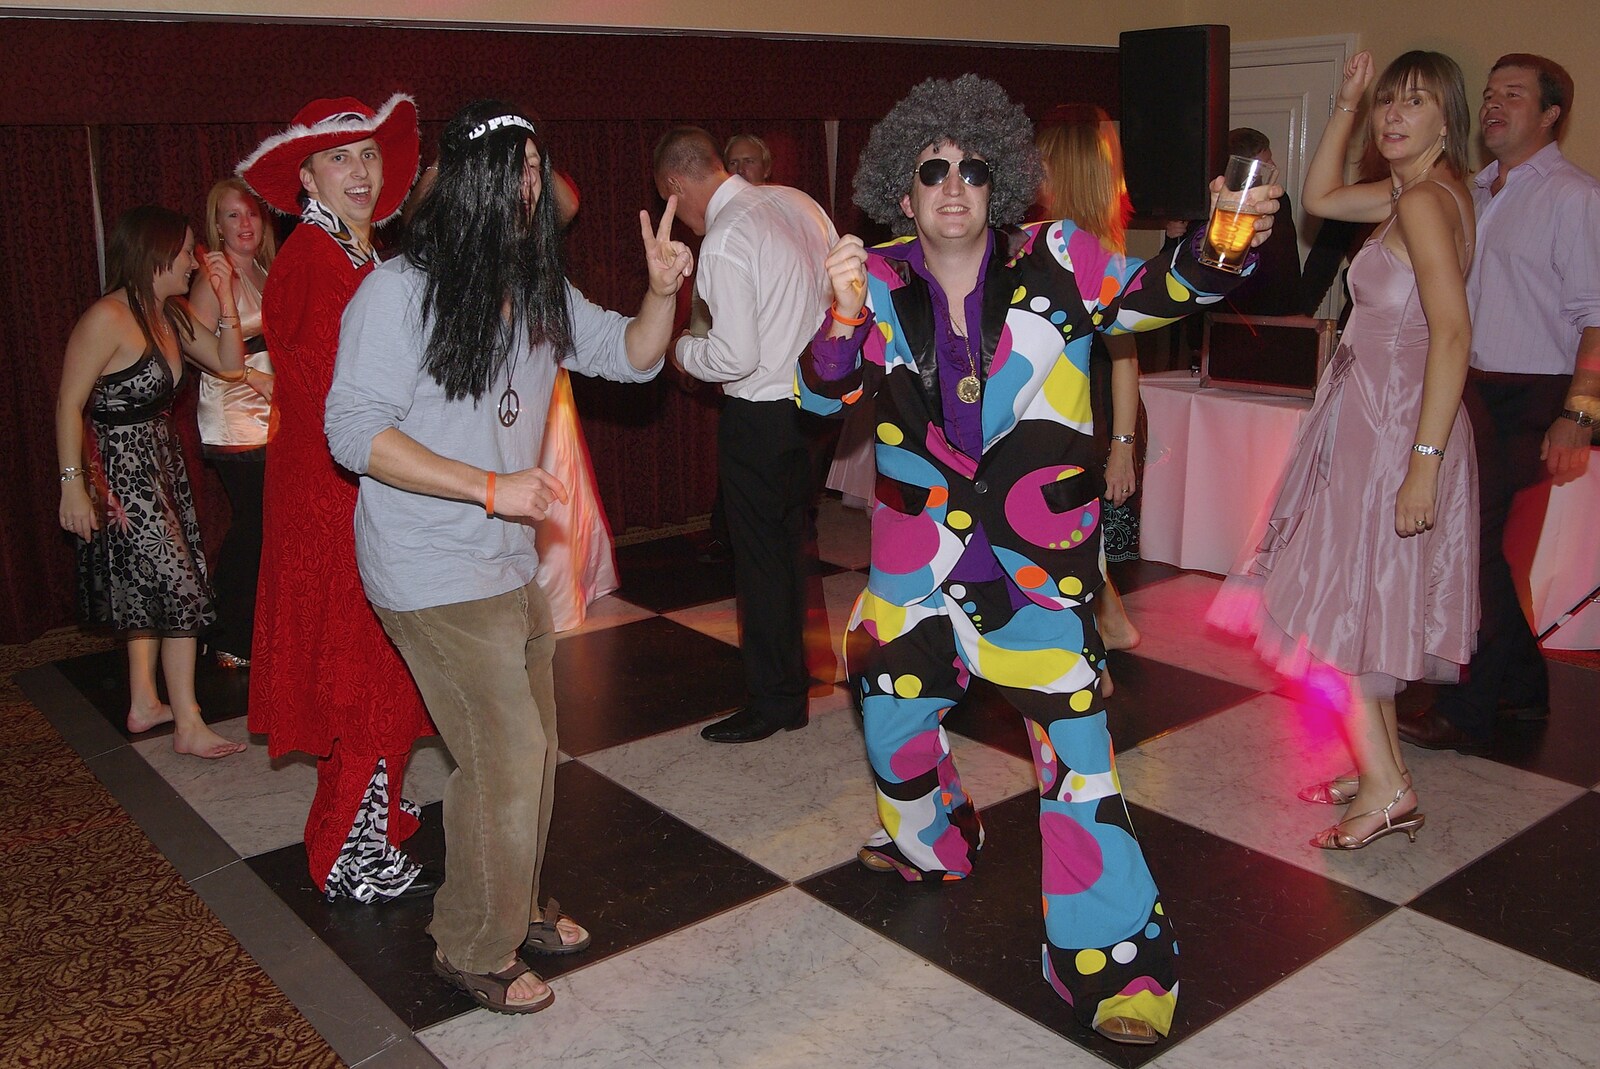 Matt's Wedding Reception, and a BSCC Presentation, Brome, Solihull and Stratford upon Avon - 6th October 2007: That 70's crowd again